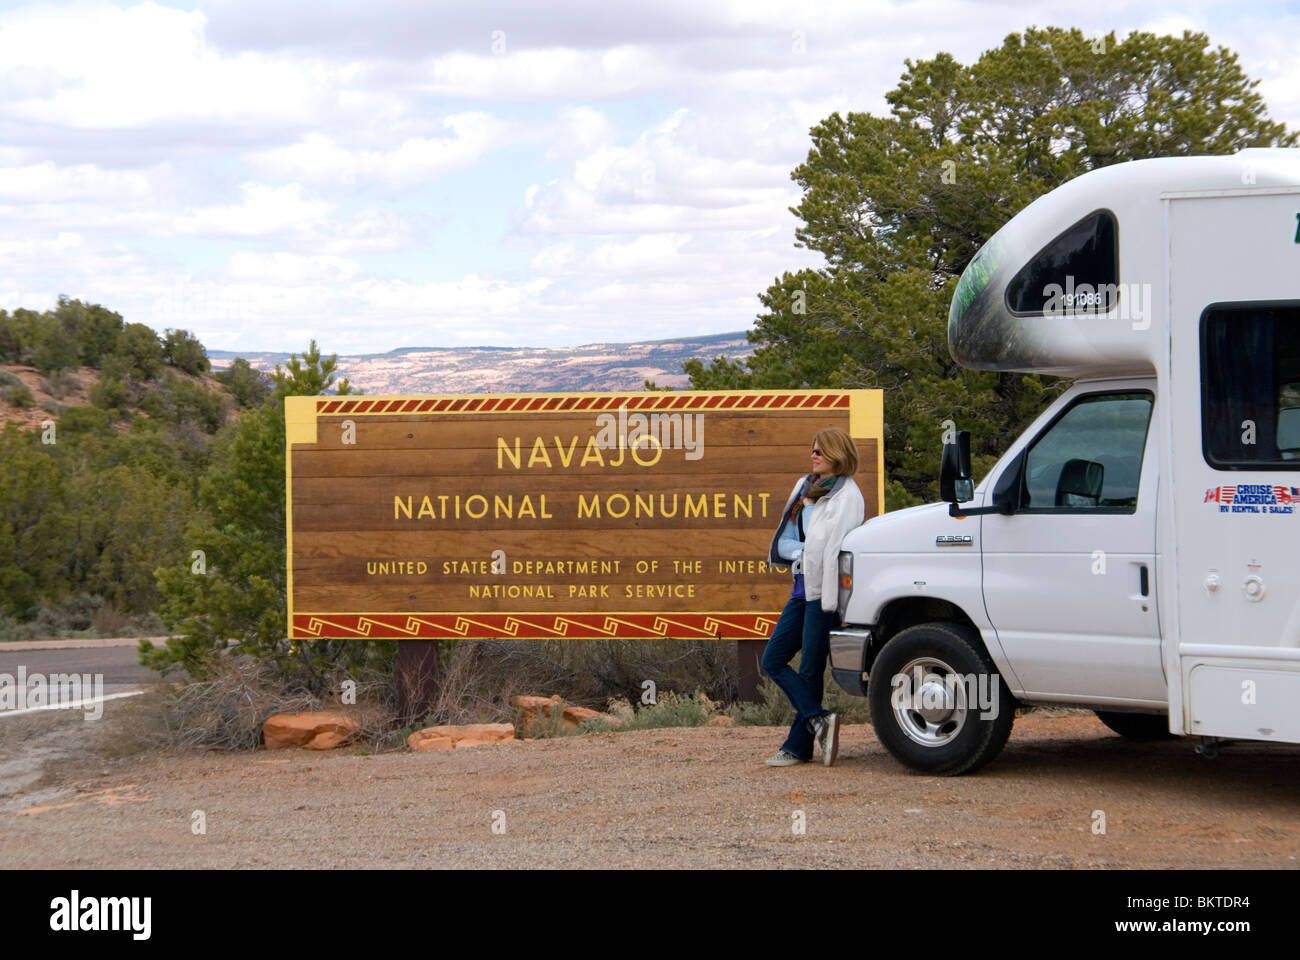 Female tourist leaning on RV campervan at entrance to Navajo National Monument Arizona USA Kim Paumier MR Stock Photo